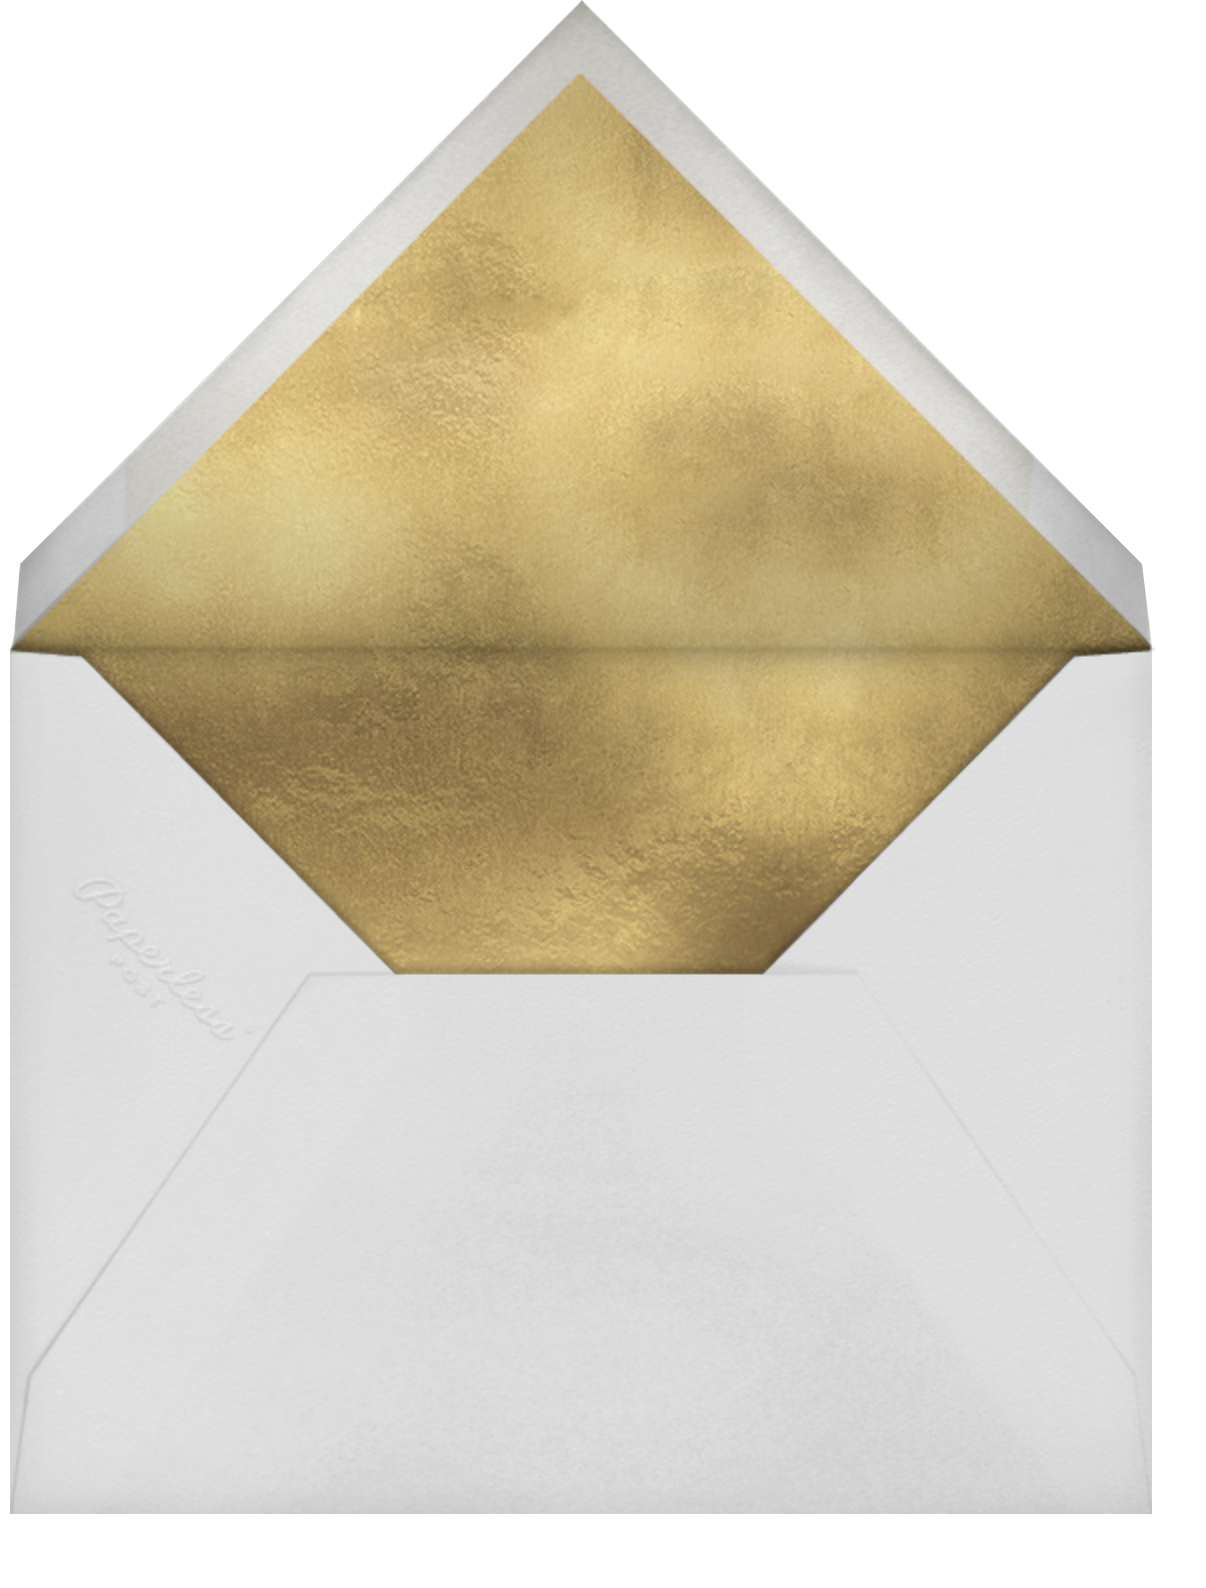 First Place - Rifle Paper Co. - Envelope